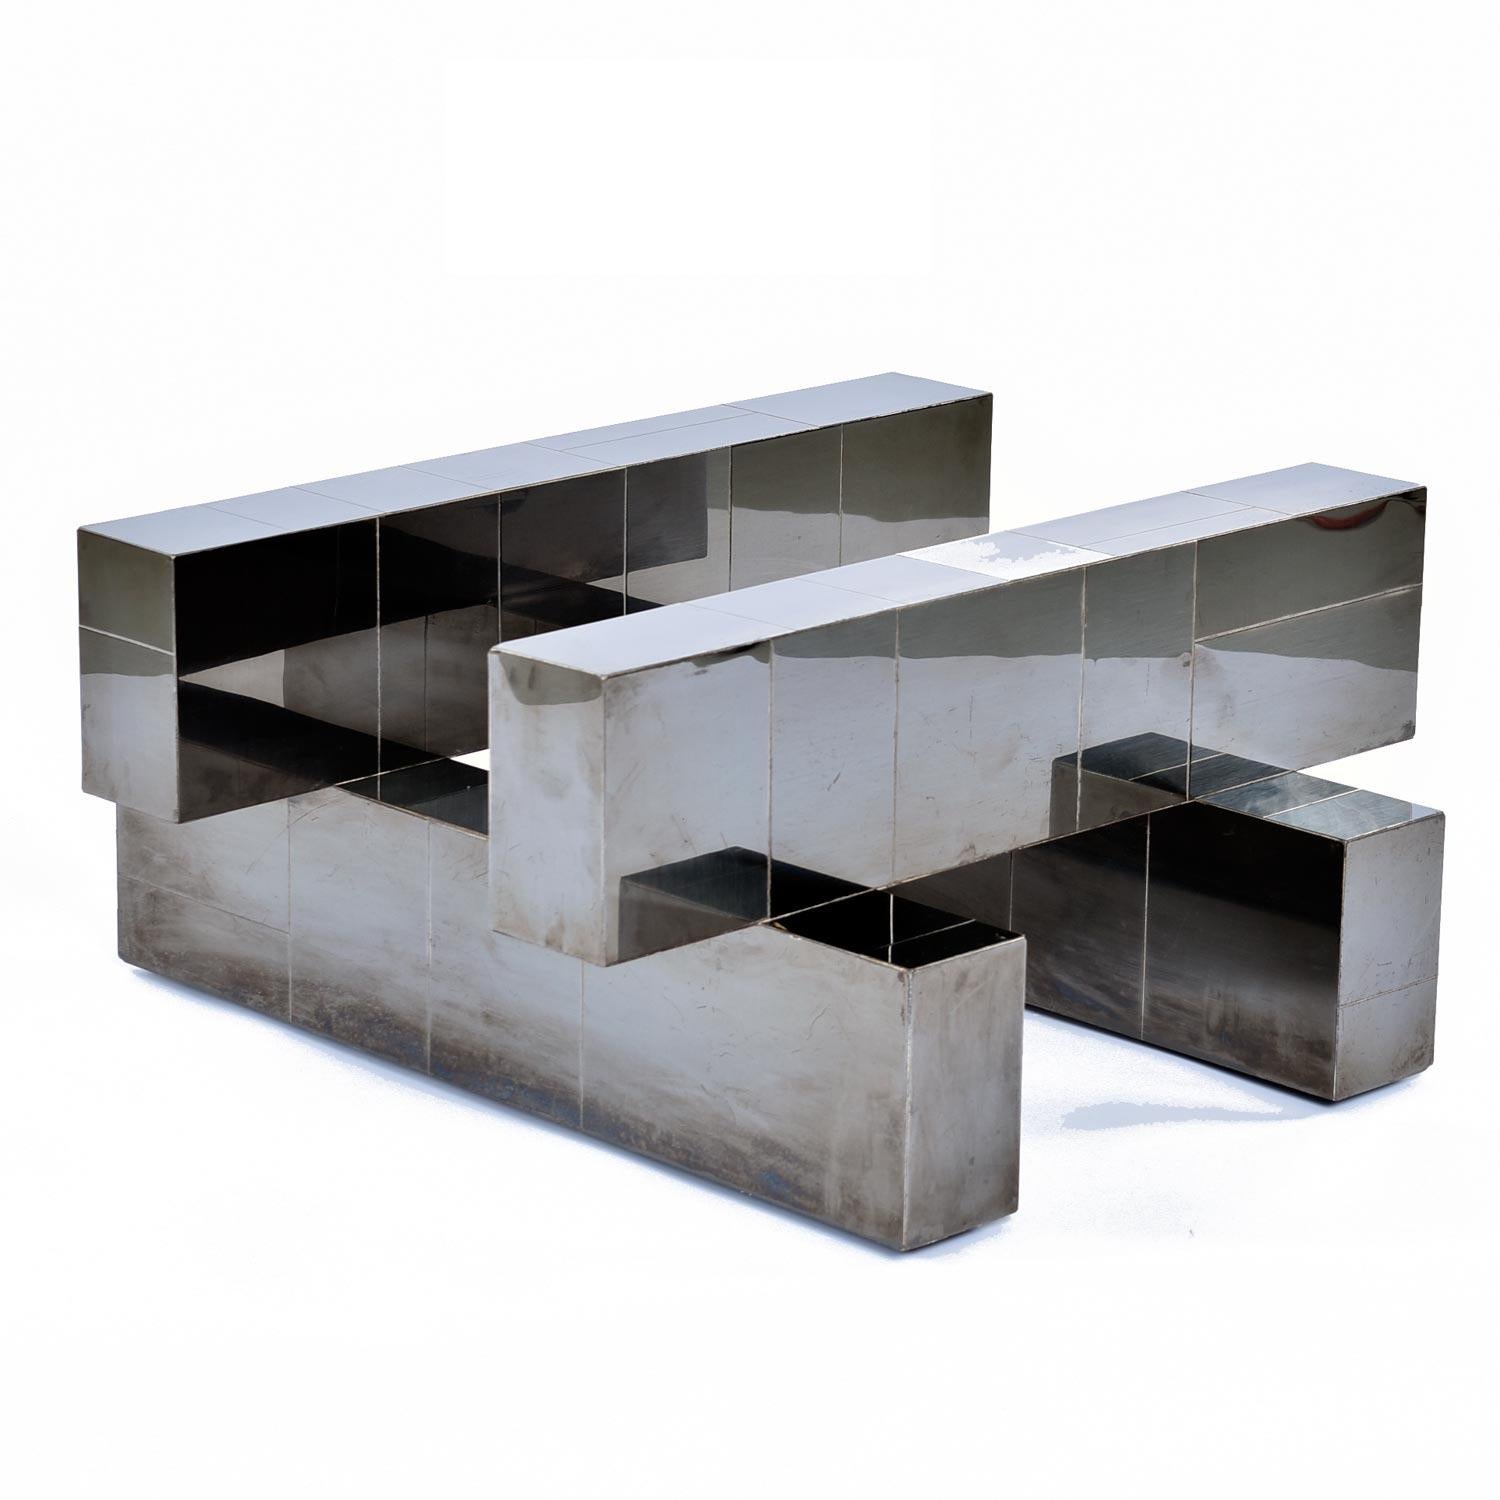 Late 20th Century Geometric Chromed Steel Cityscape Coffee Table with Round Glass by Paul Evans